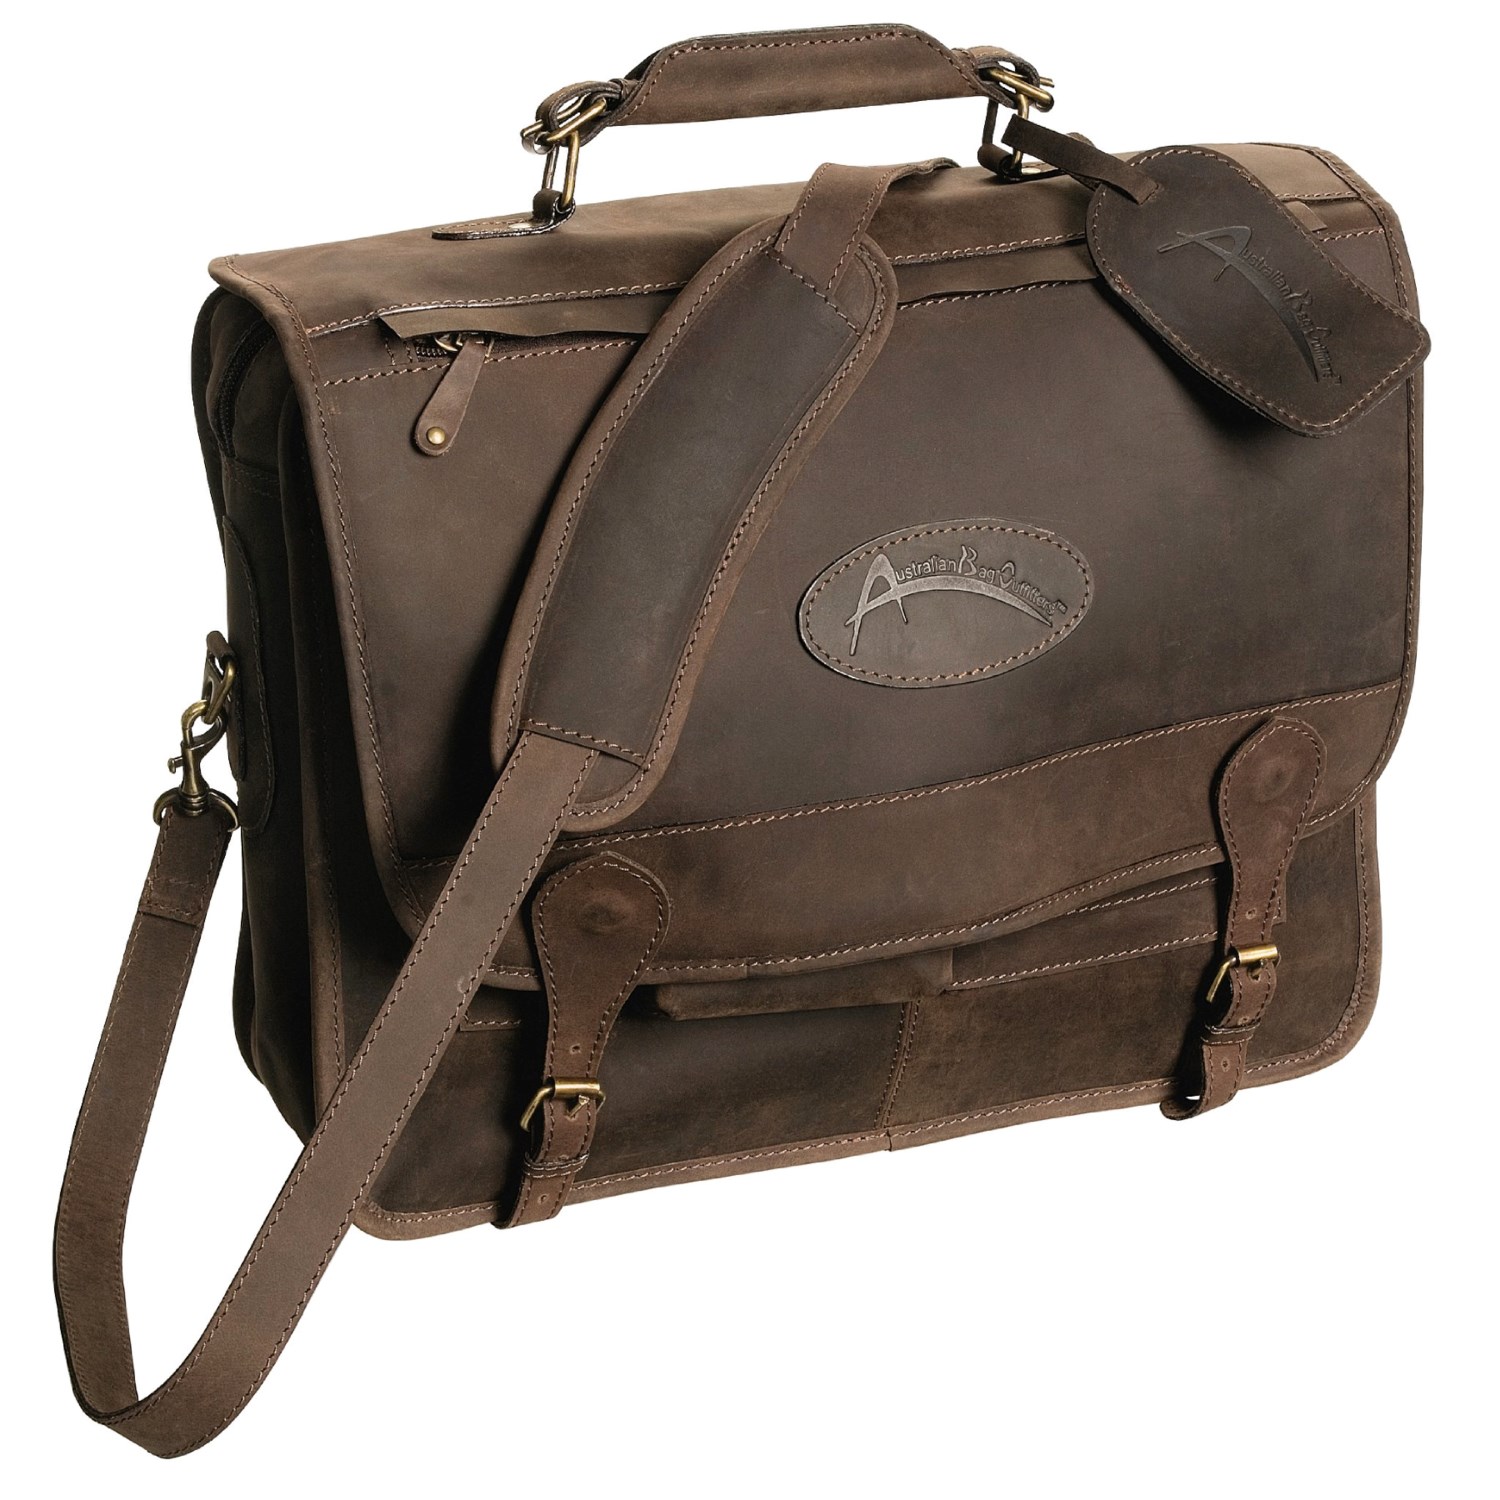 Australian Bag Outfitters Cobber Messenger Bag - Leather 1105C - Save 39%